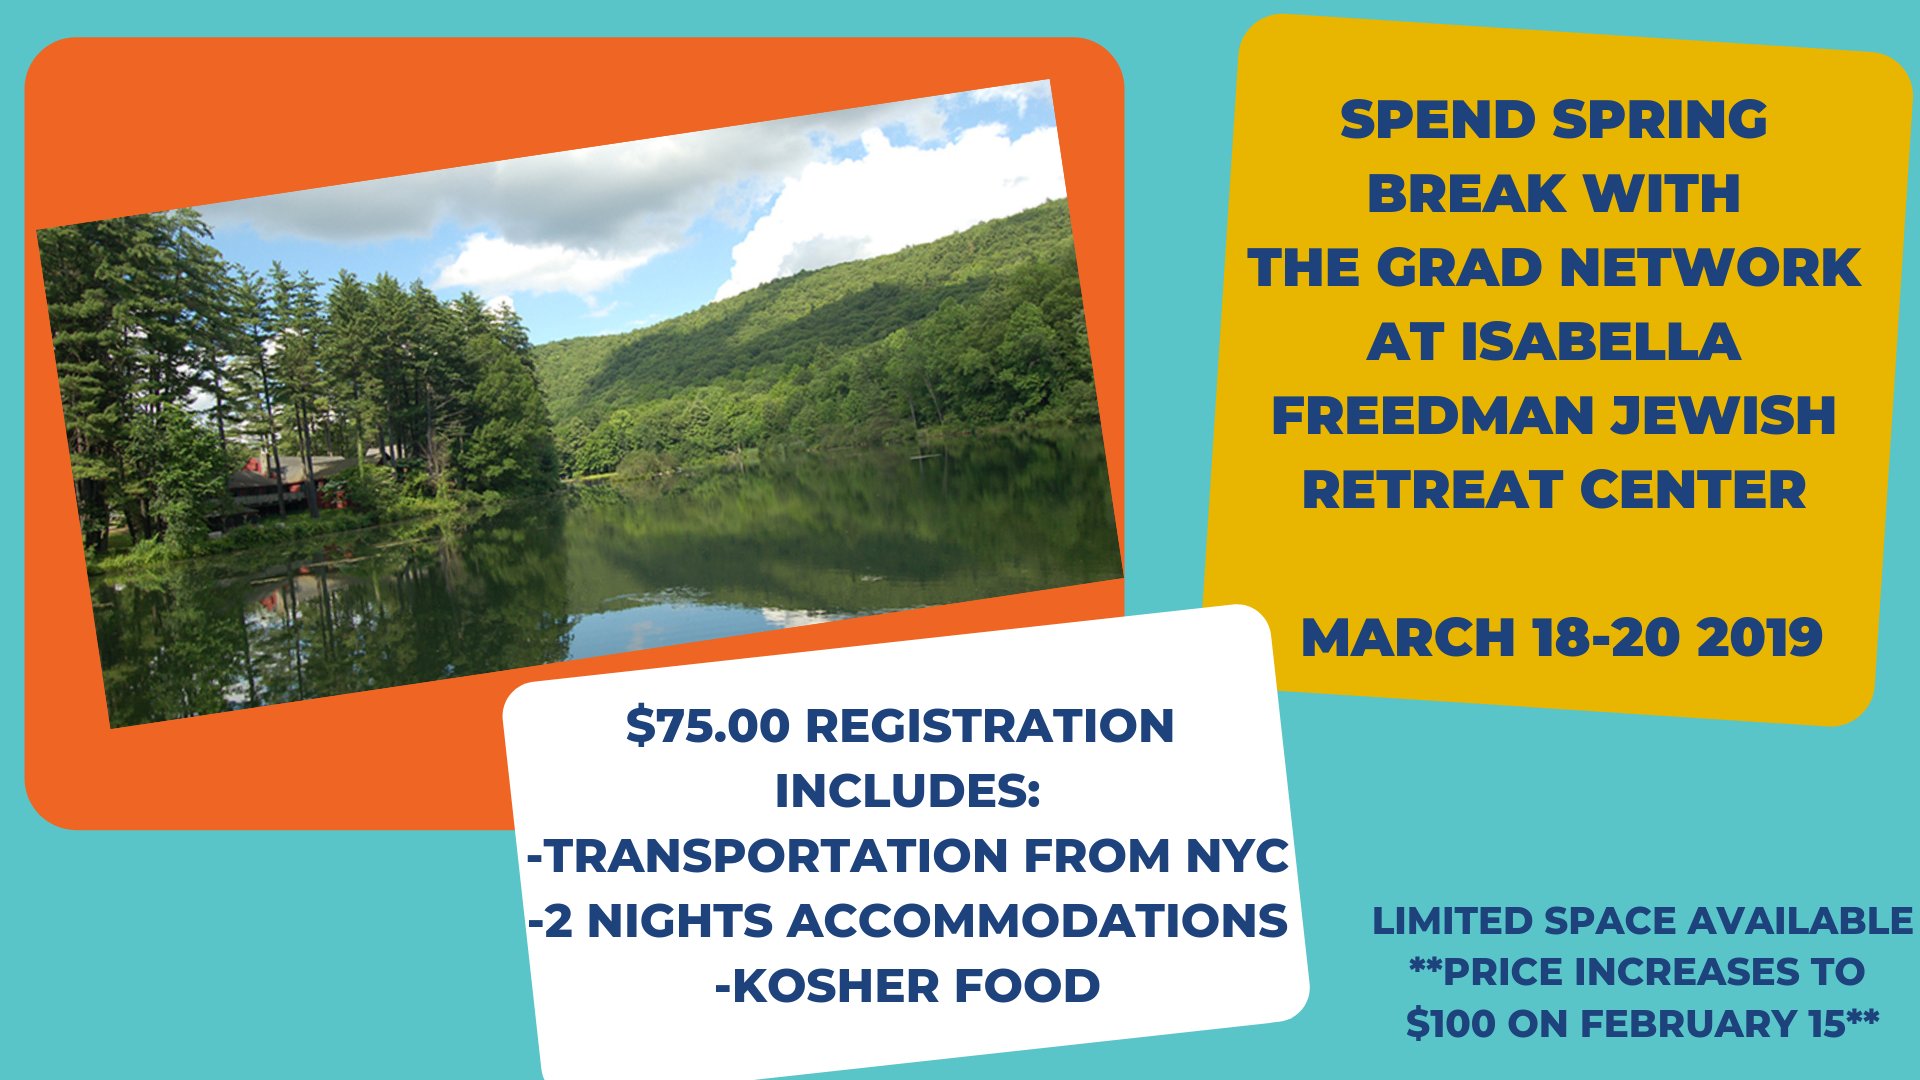 SPEND SPRING BREAK WITH THE GRAD NETWORK Columbia Barnard Hillel